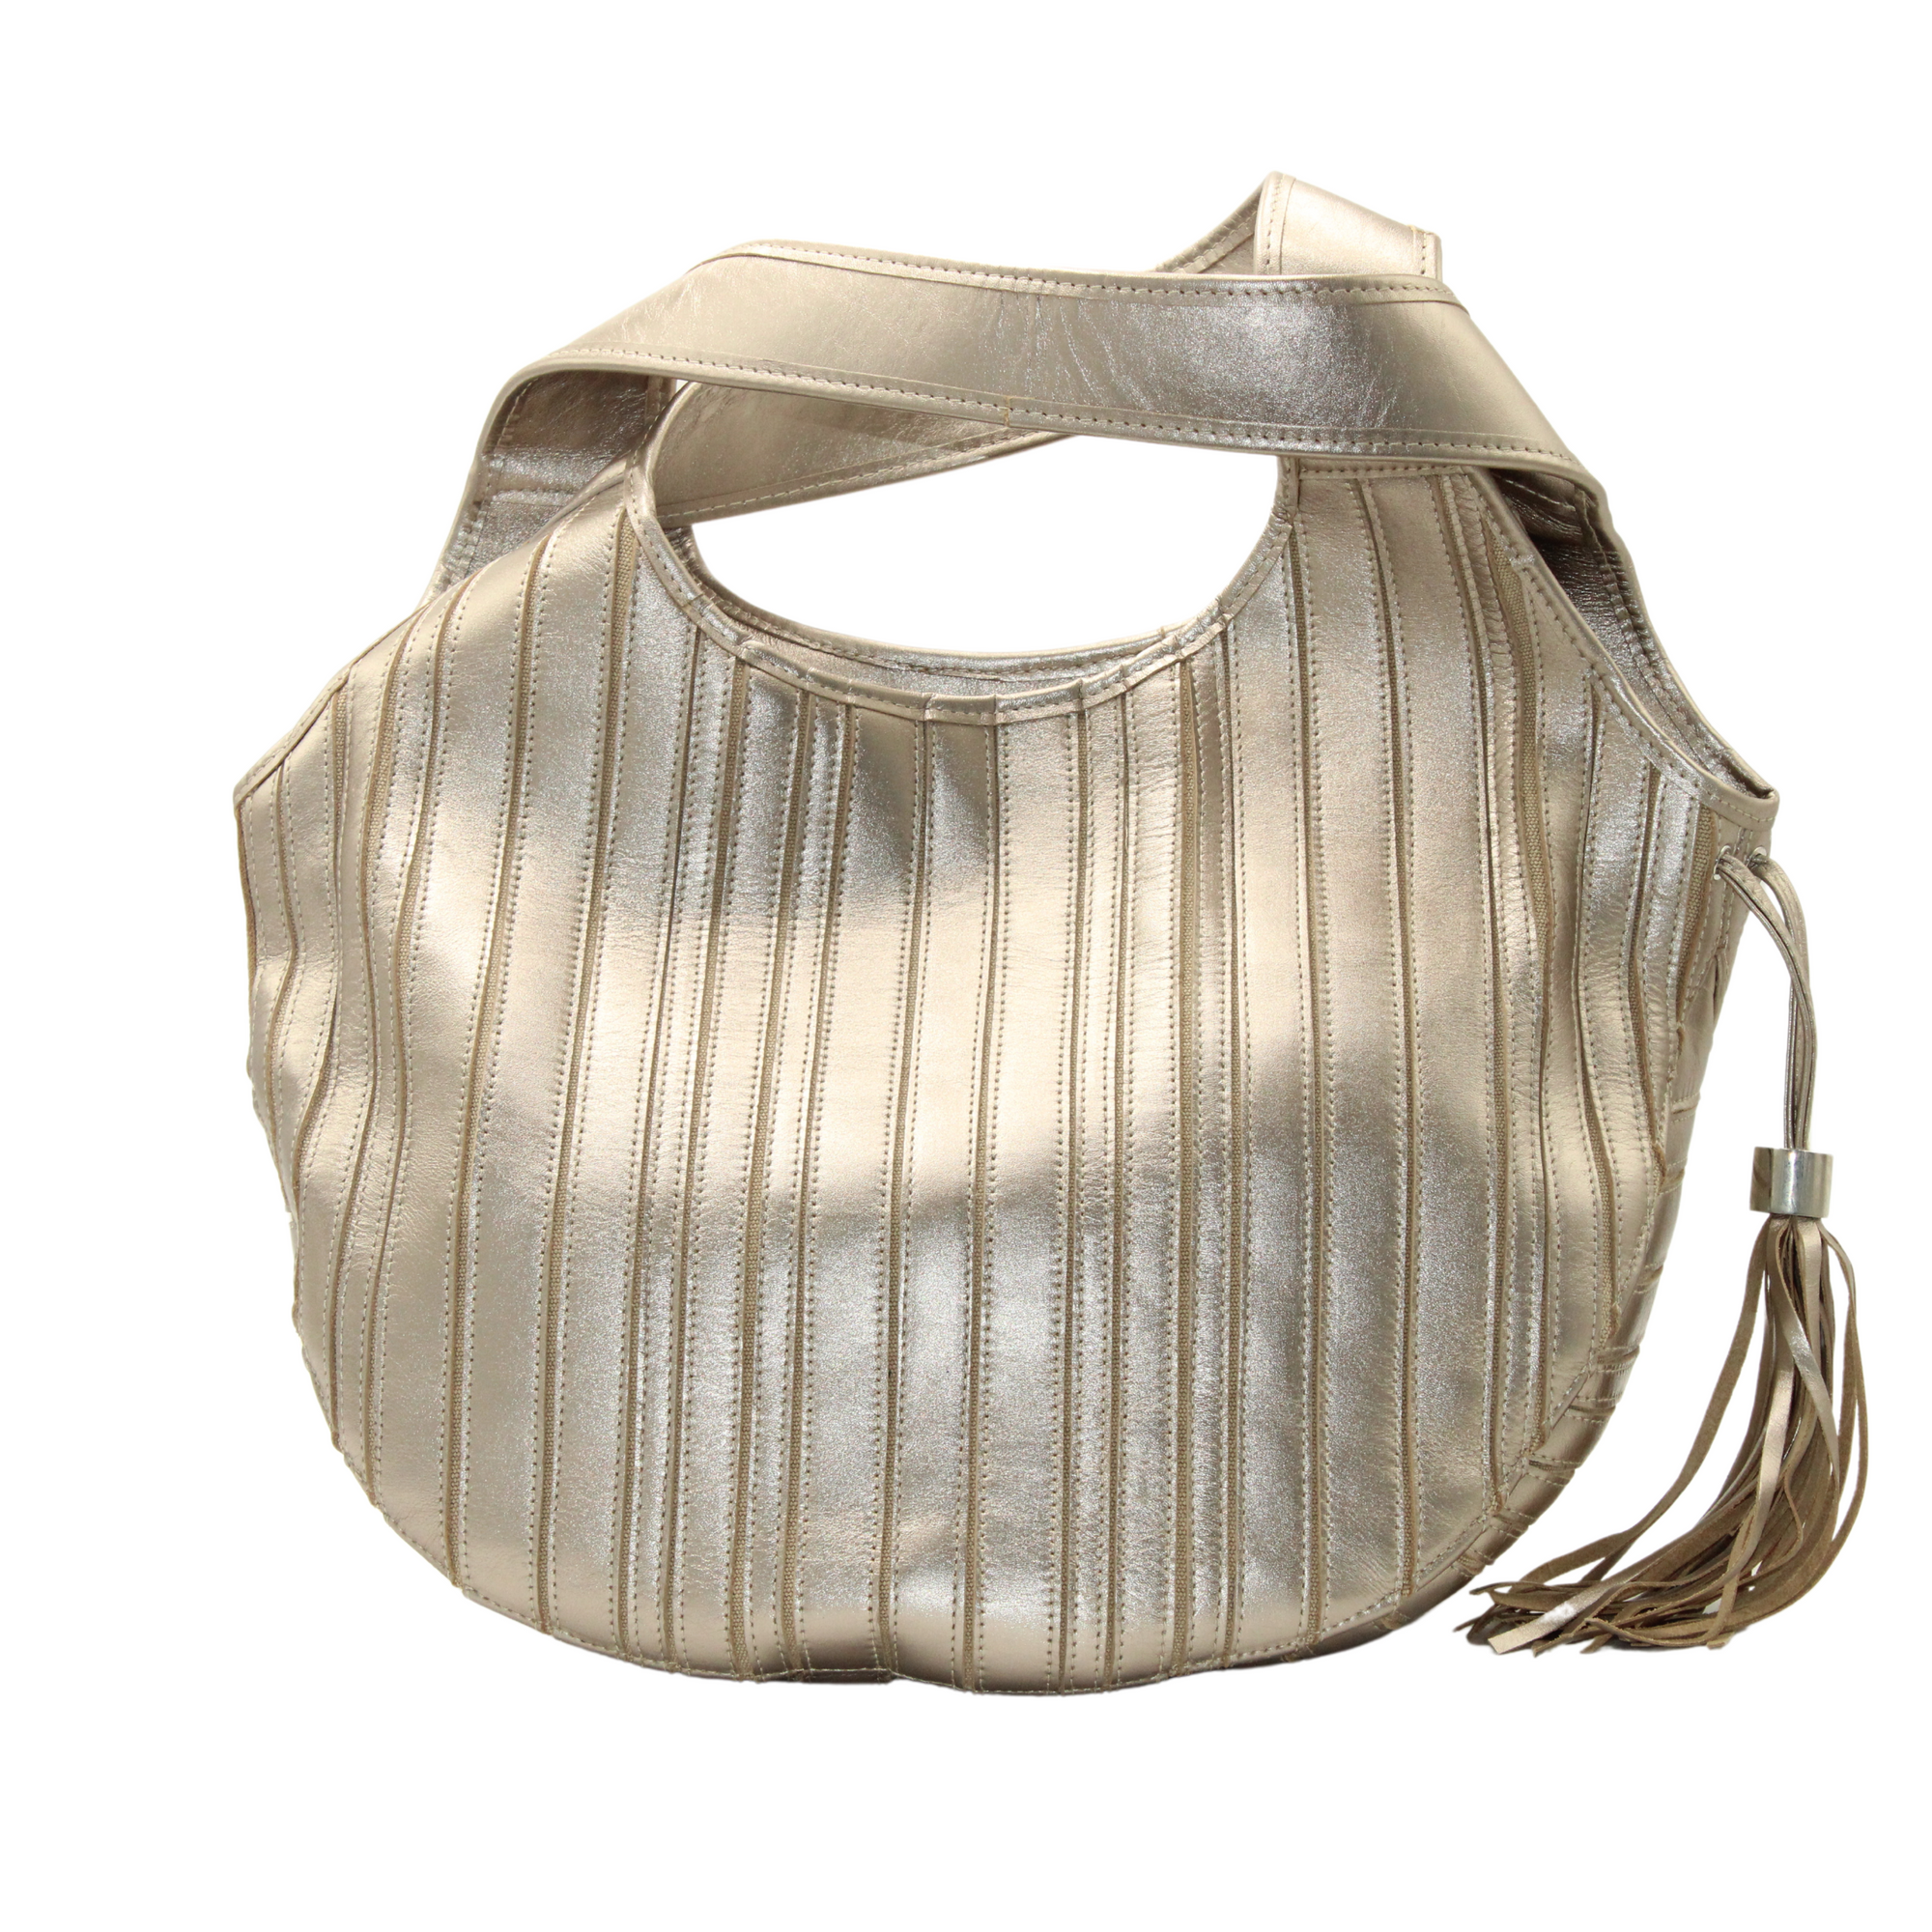 Very Low Stock - Hobo in Metallic Champagne Gold